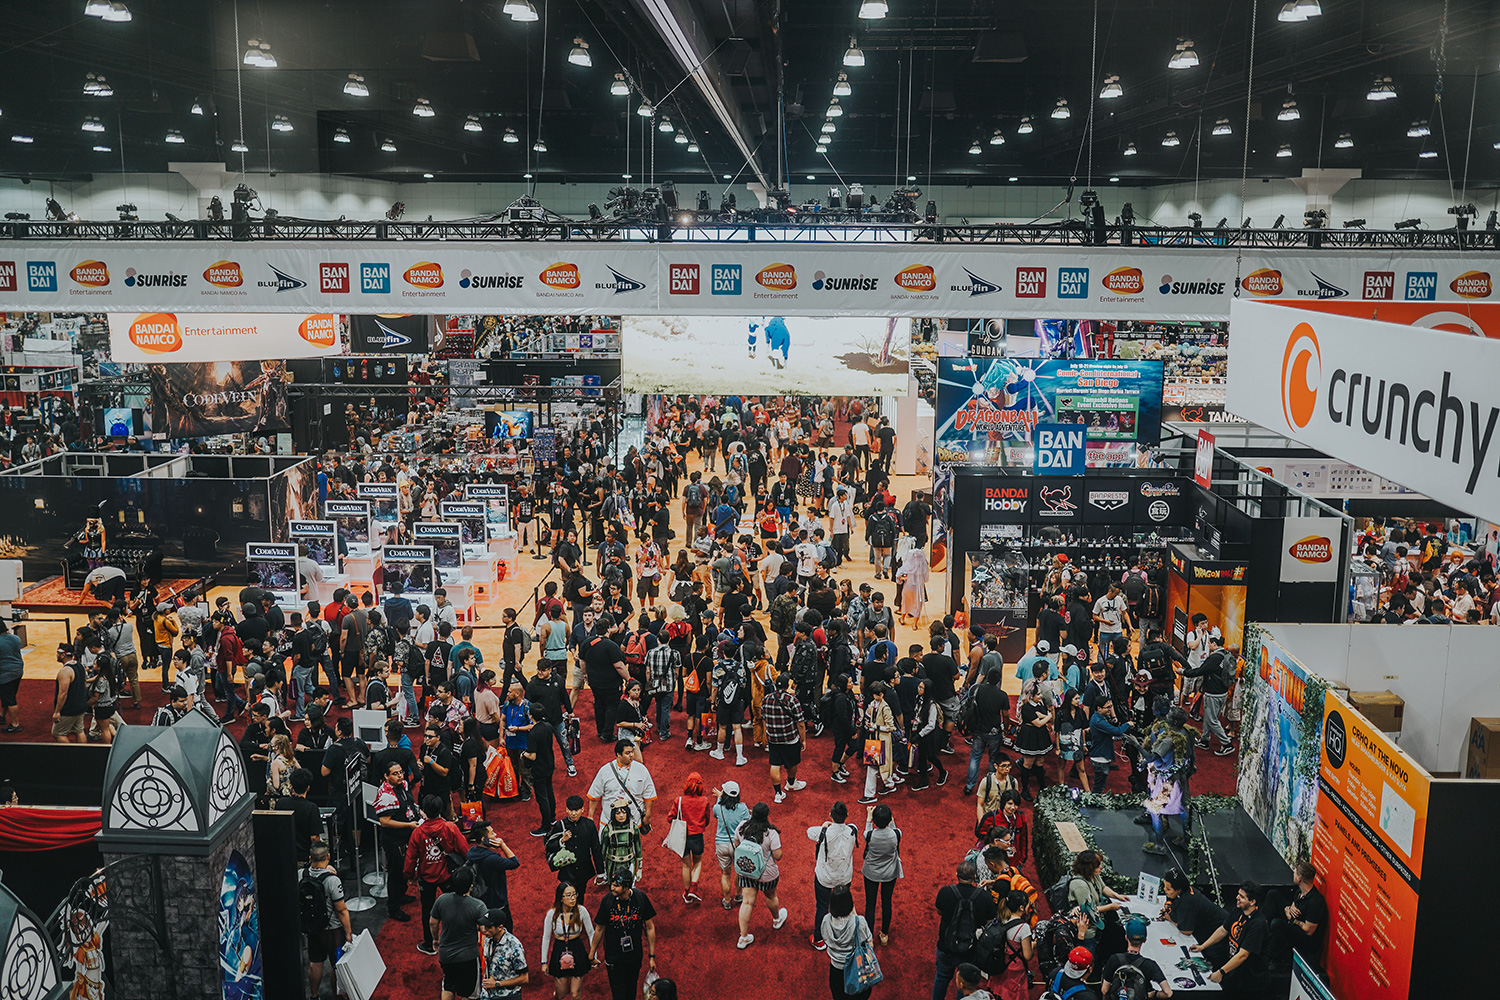 XPPen in Anime Expo 2019